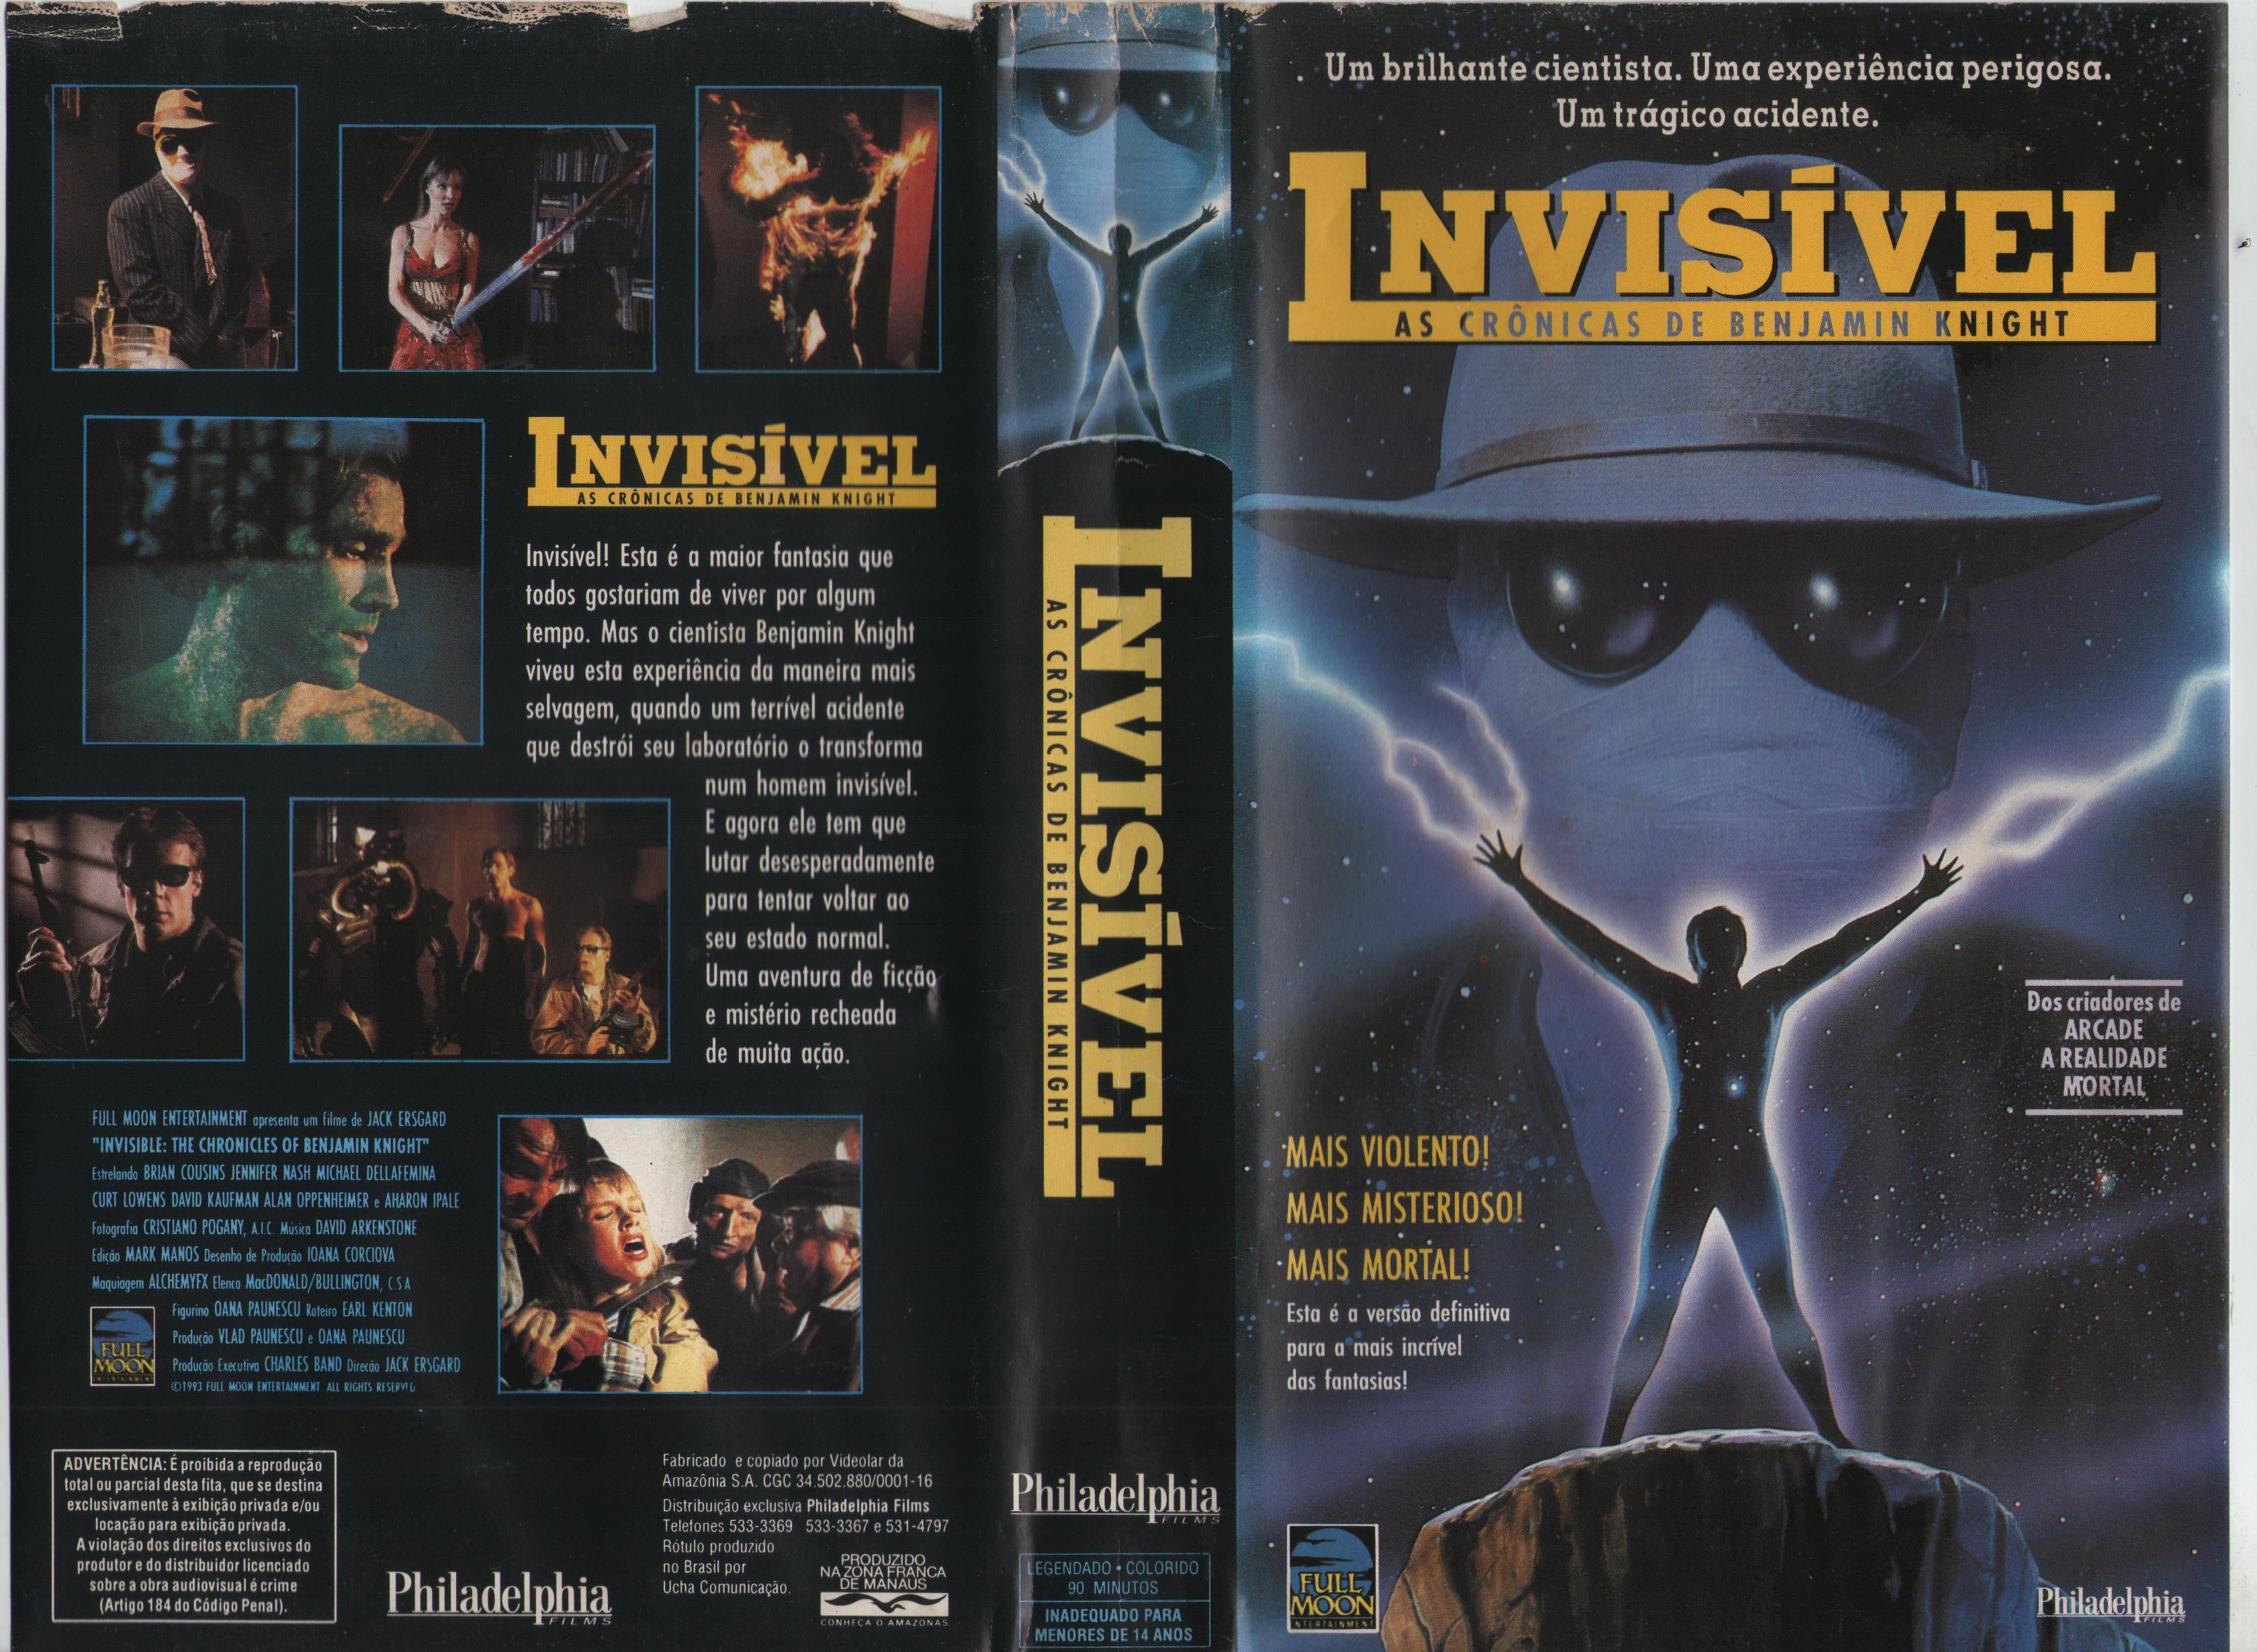 Invisible: The Chronicles of Benjamin Knight (1993) Screenshot 5 